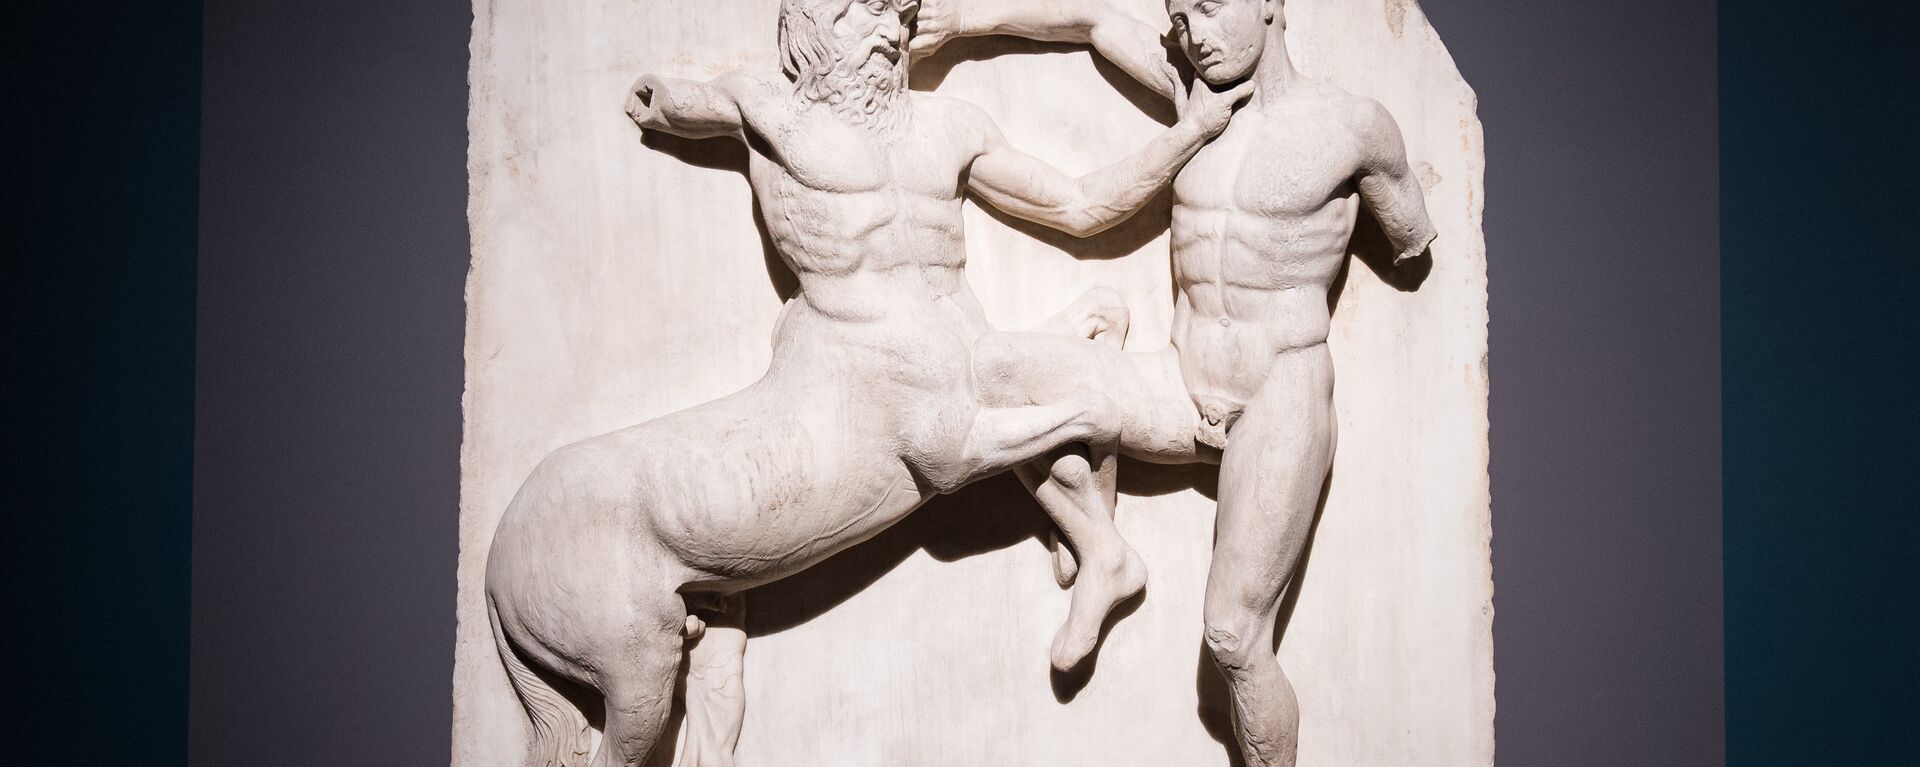 A marble metope sculpture (447-438BC) from the Parthenon in Athens, part of the collection that is popularly referred to as the Elgin Marbles, depicting a battle between a Centaur and a Lapith. - Sputnik International, 1920, 20.06.2020